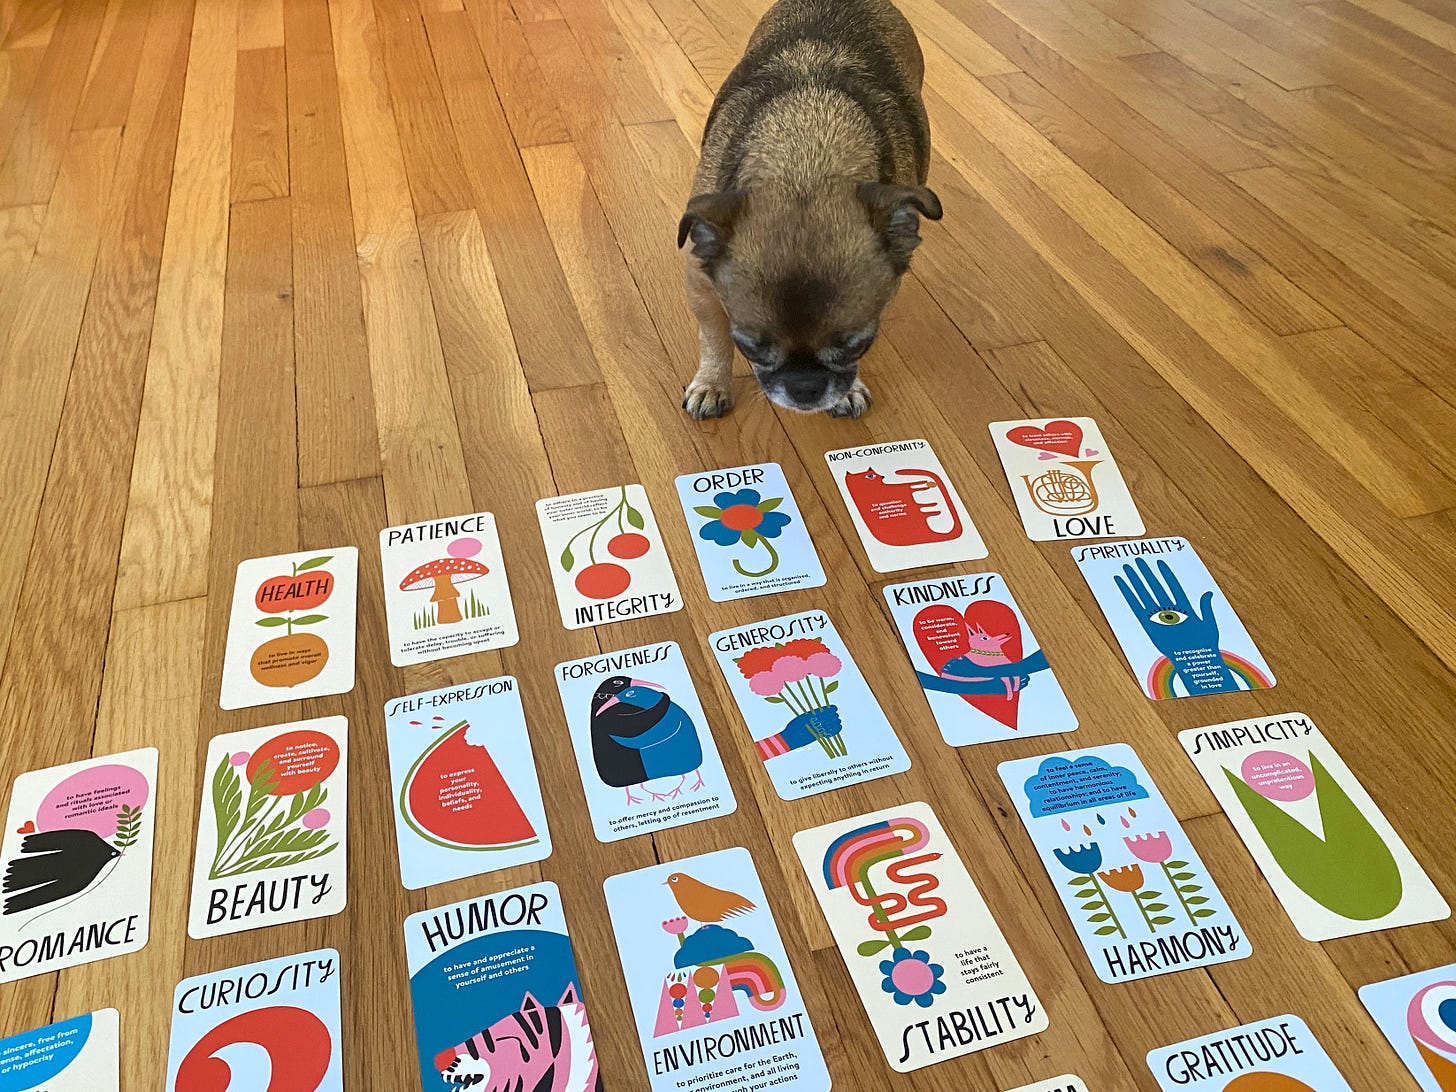 A small Brussels Griffon dog stands on a wood floor looking at a bunch of colorful values cards arranged on the floor. The cards say things like health, patience, integrity, order, kindness, harmony, etc. and each features a colorful but simple illustration.